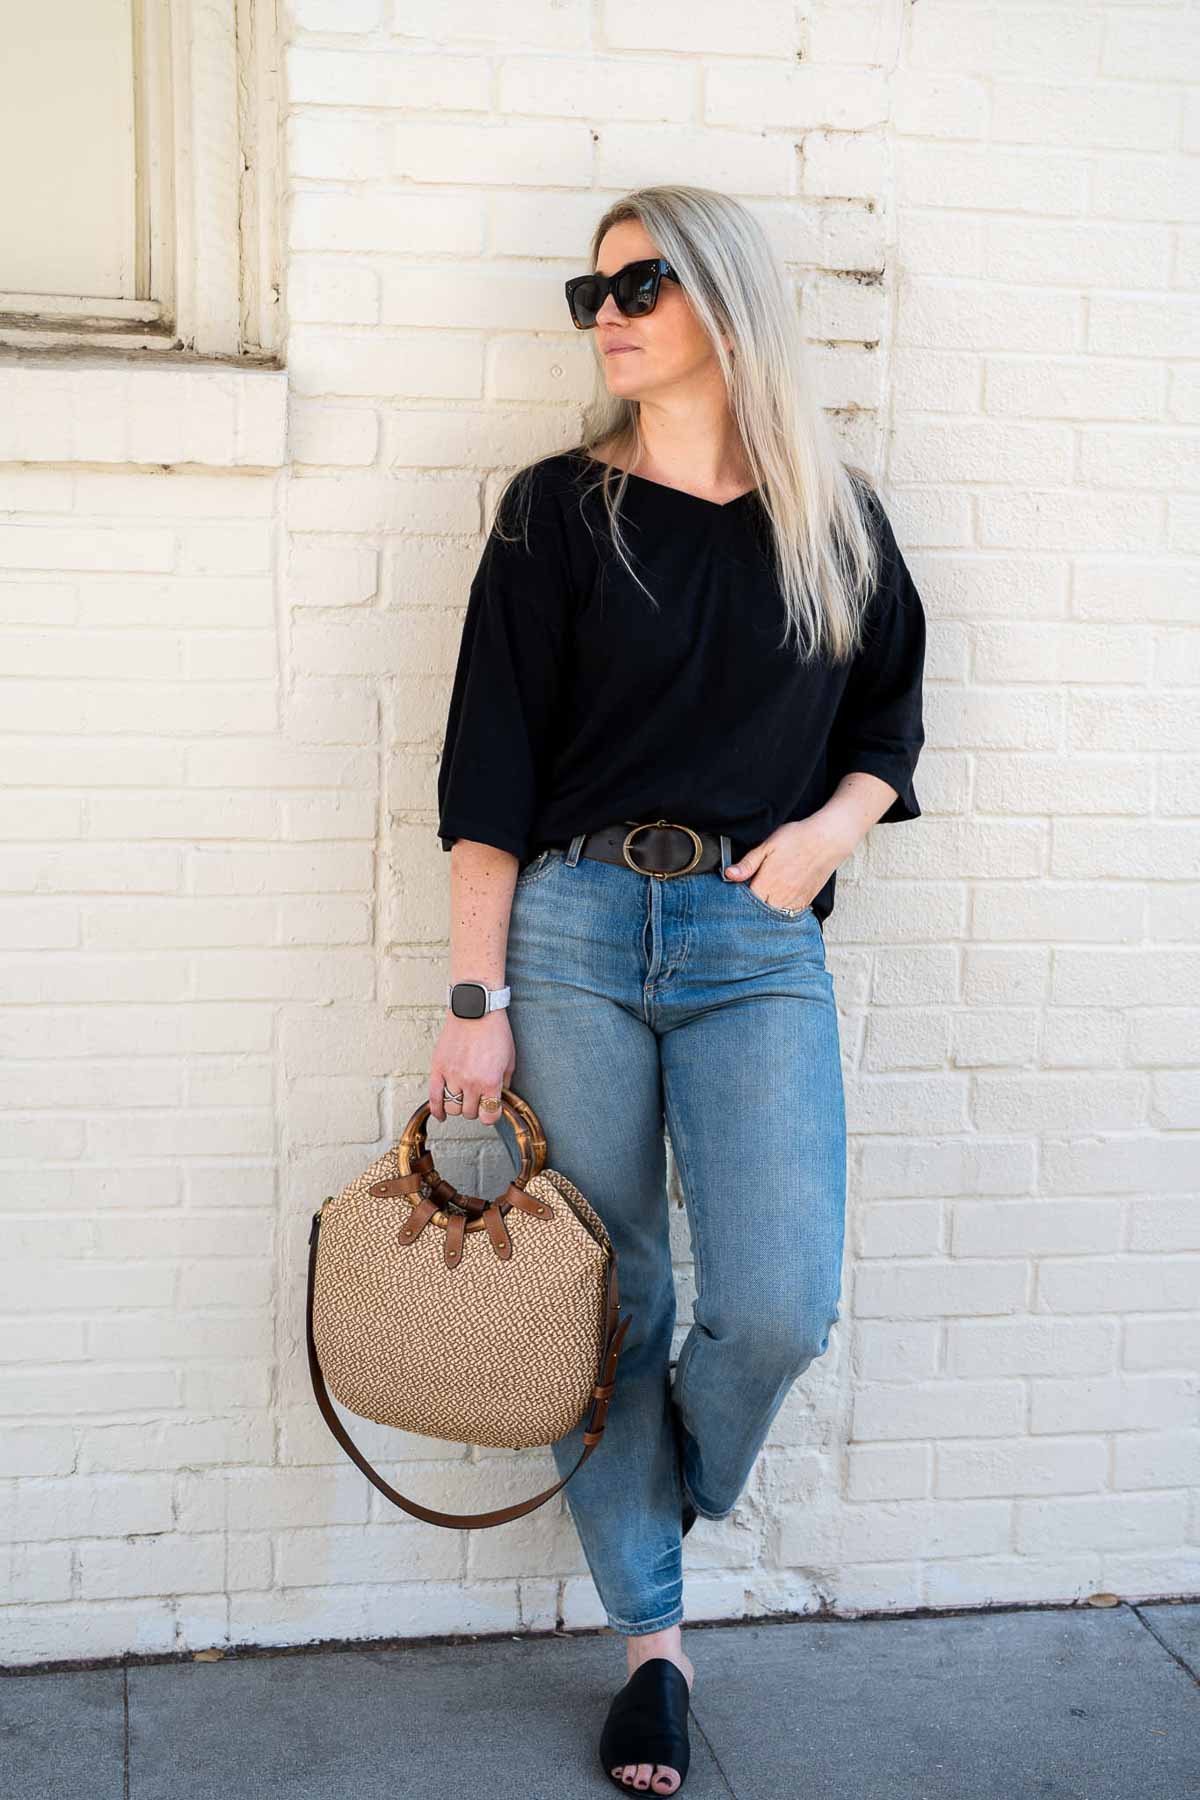 Outfit with Black top, sustainable jeans brand Outerknock, and slide black flats